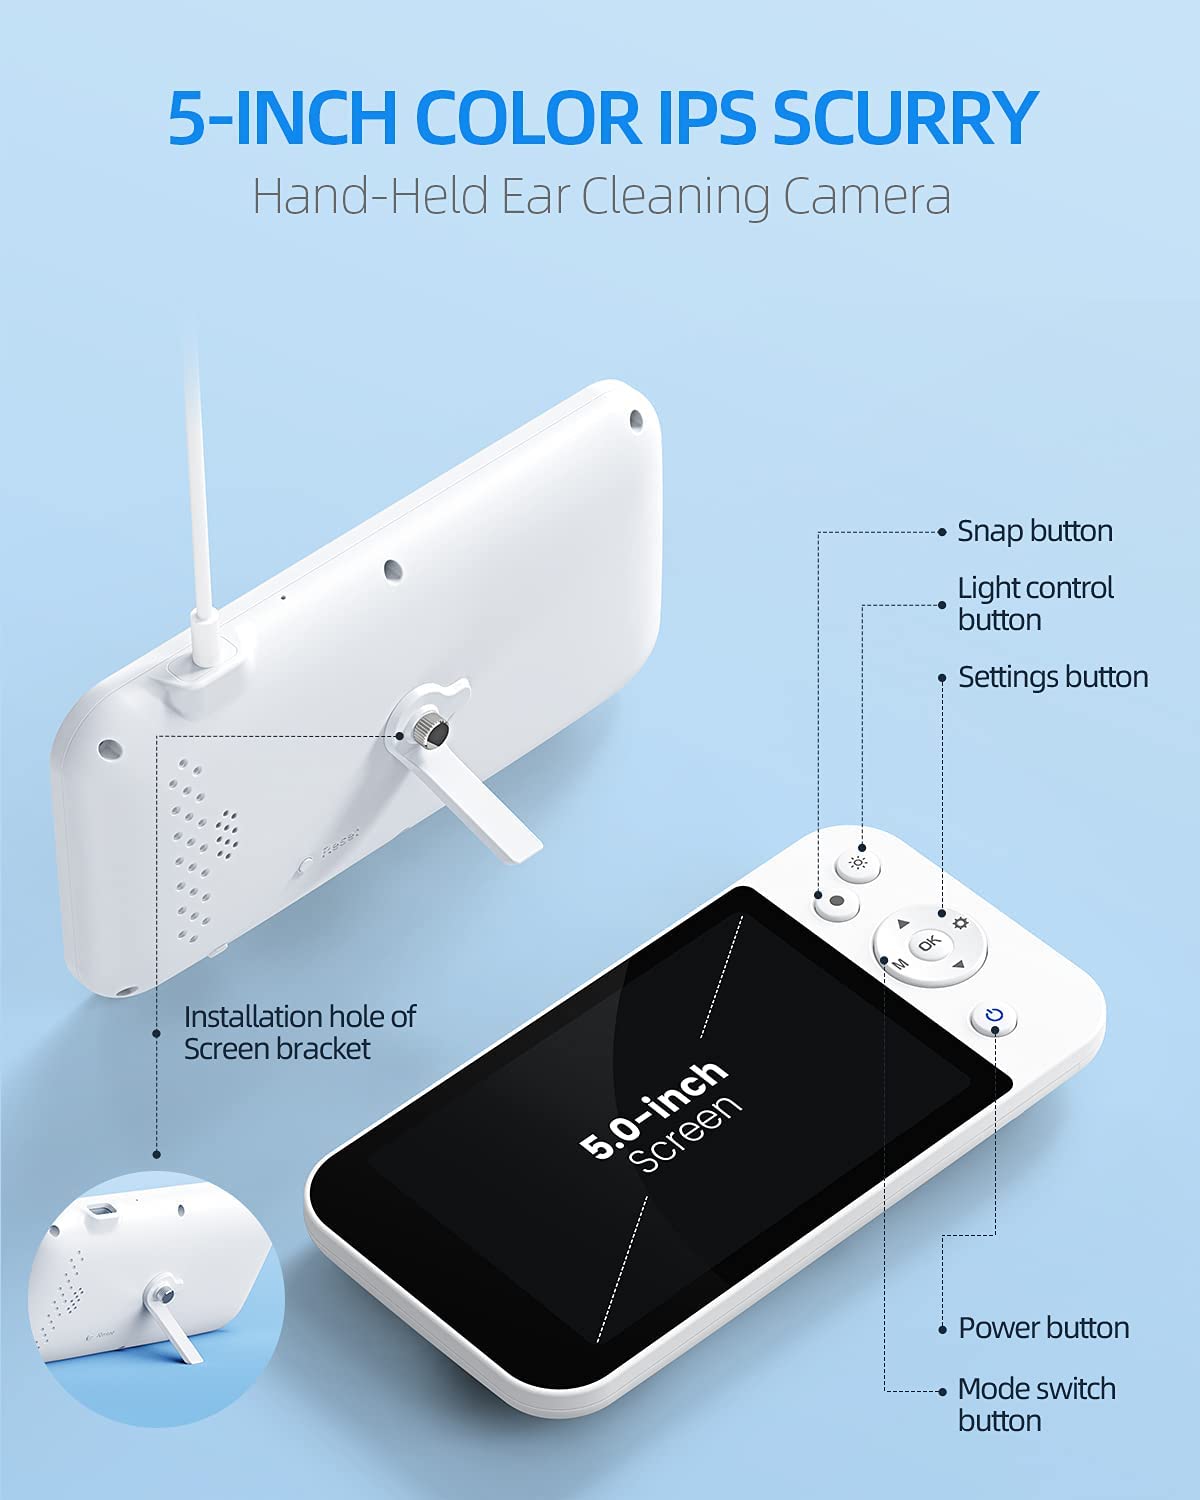 ScopeAround Ear Wax Removal Camera, Visual Ear Cleaner with 5 IPS Screen,  Digital Otoscope with Ear Cleaning Tool, 32G Card, HD Video Ear Scope  Supports Photo Snap and Video Recording 